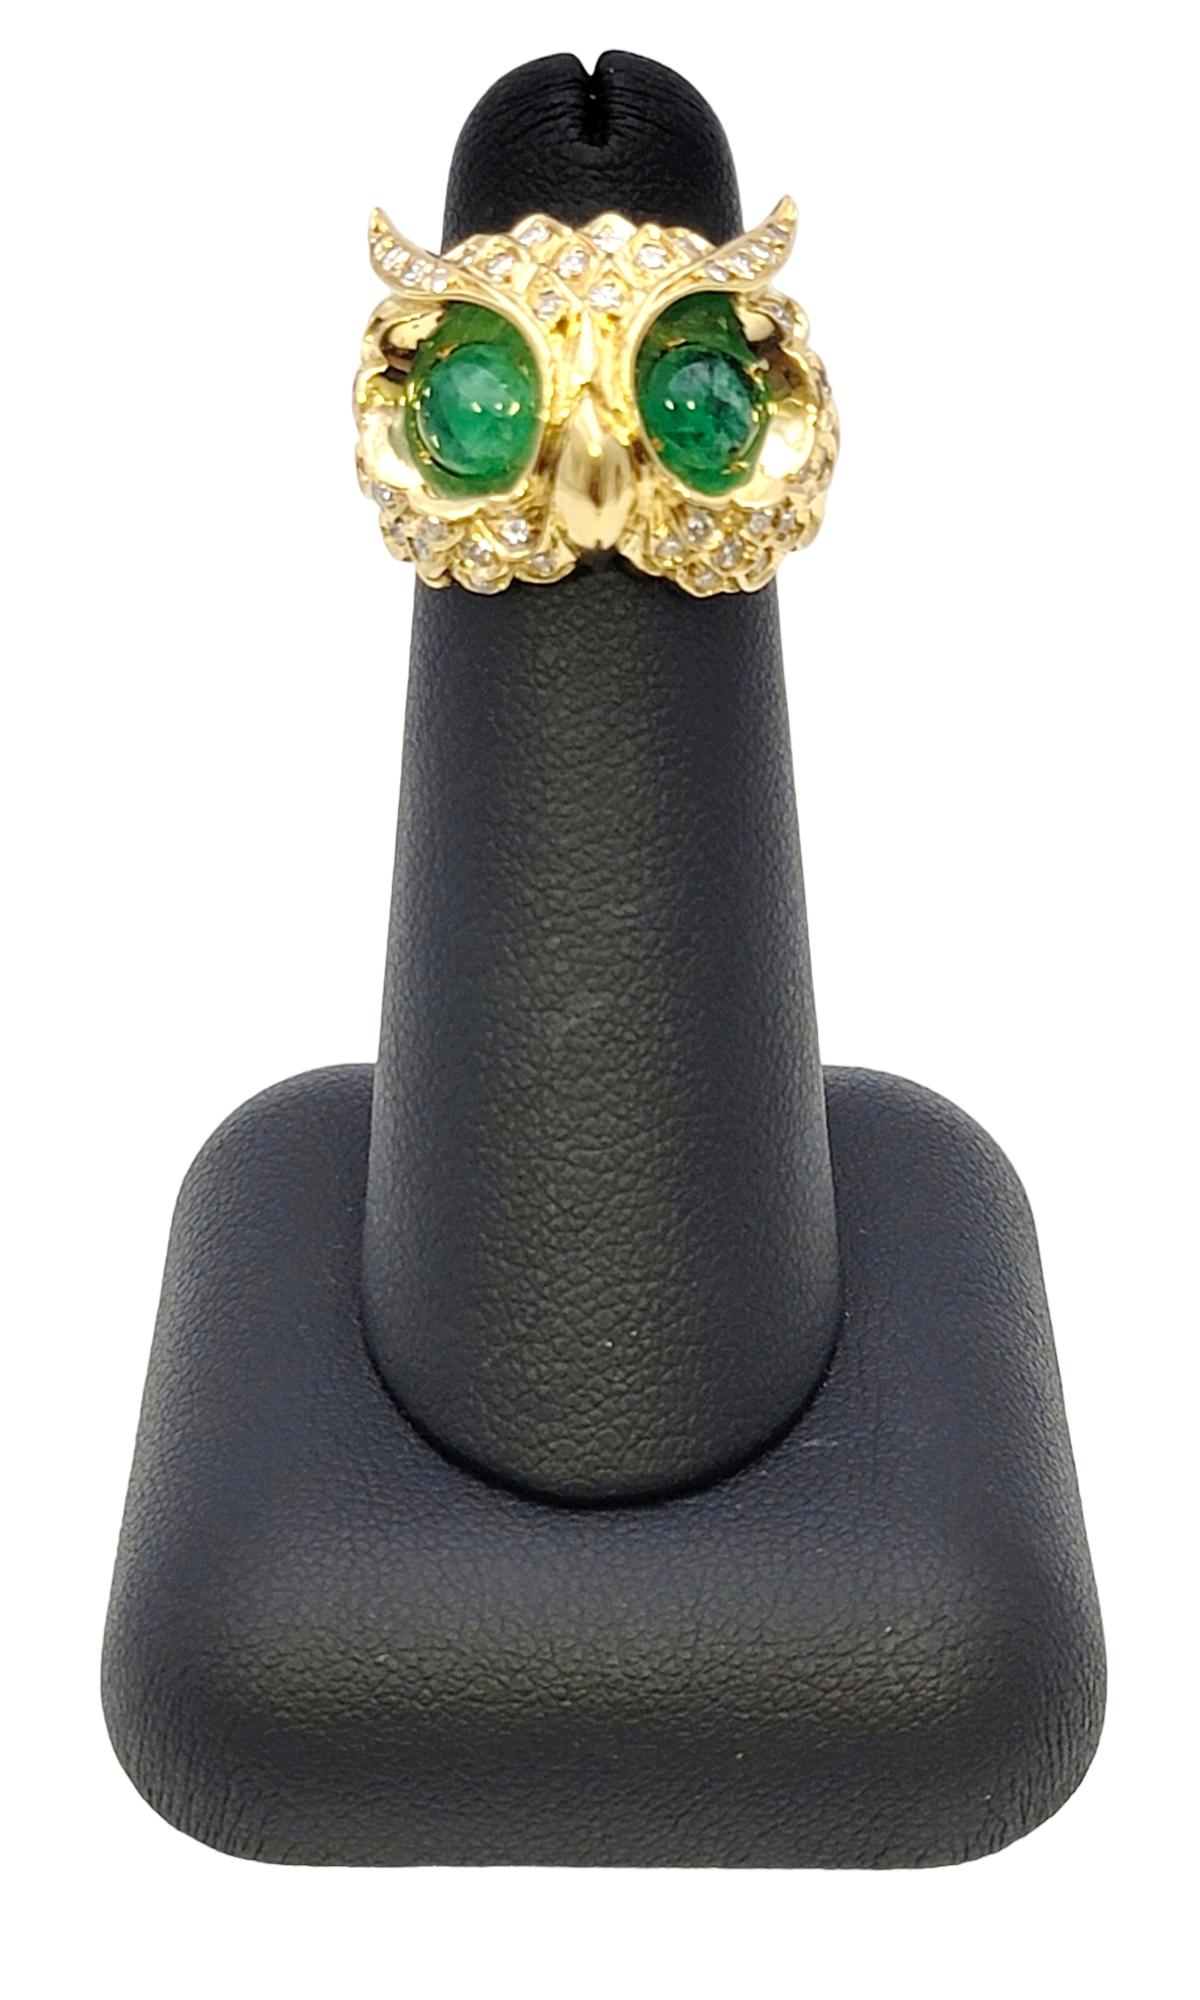 Diamond Embellished Owl Ring with Cabochon Emerald Eyes in 14 Karat Yellow Gold For Sale 6